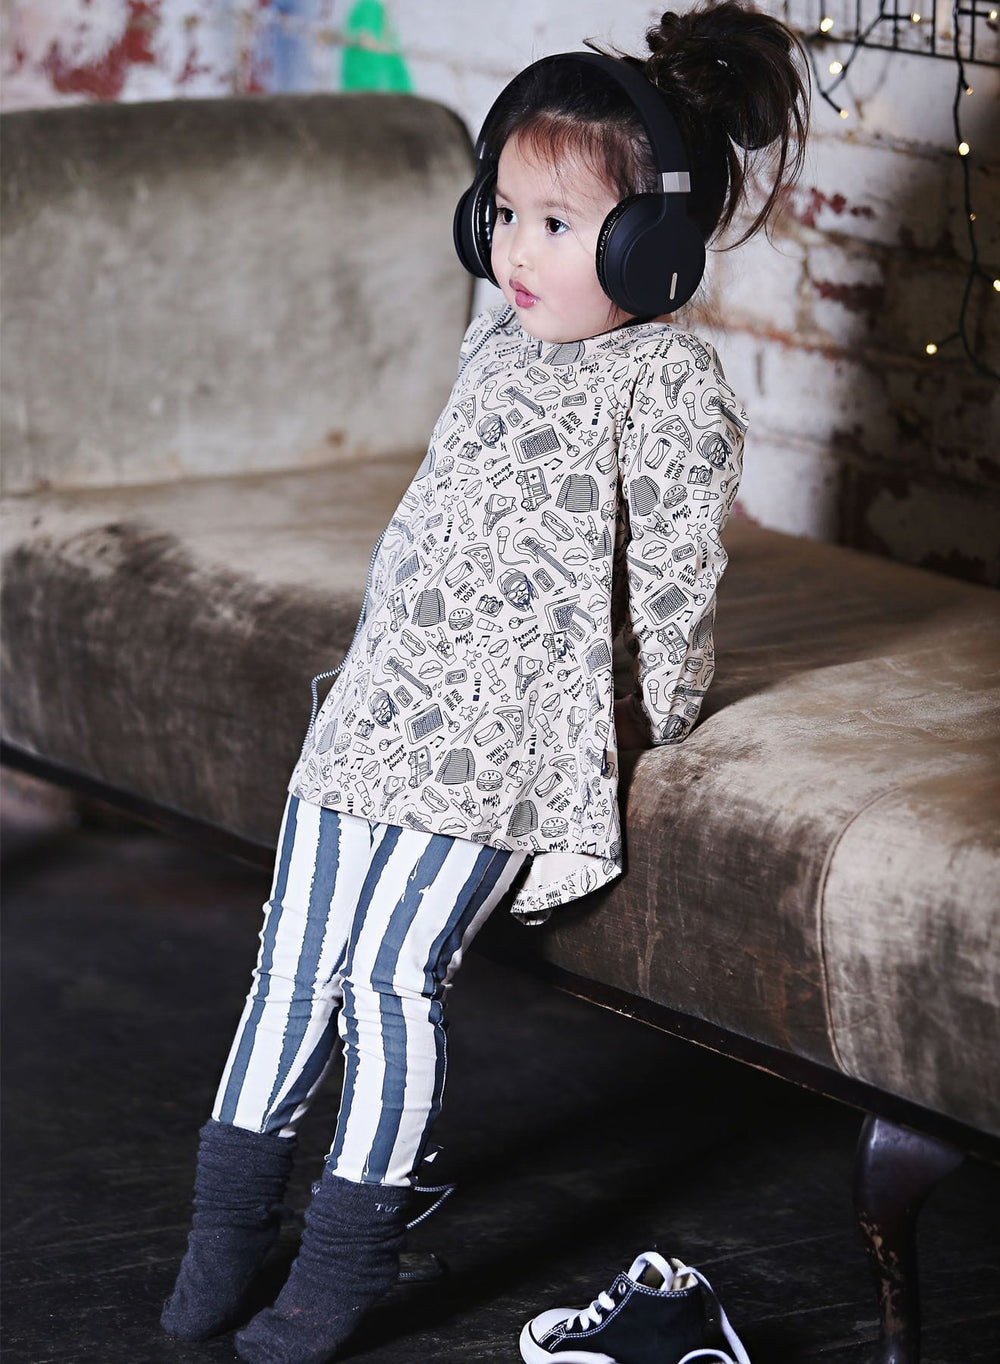 A little girl wearing Anarkid Organic Cotton Mosh Pit Band Swing Dress - LUCKY LAST - 0-3 MONTHS and sitting on a couch, ethically made.